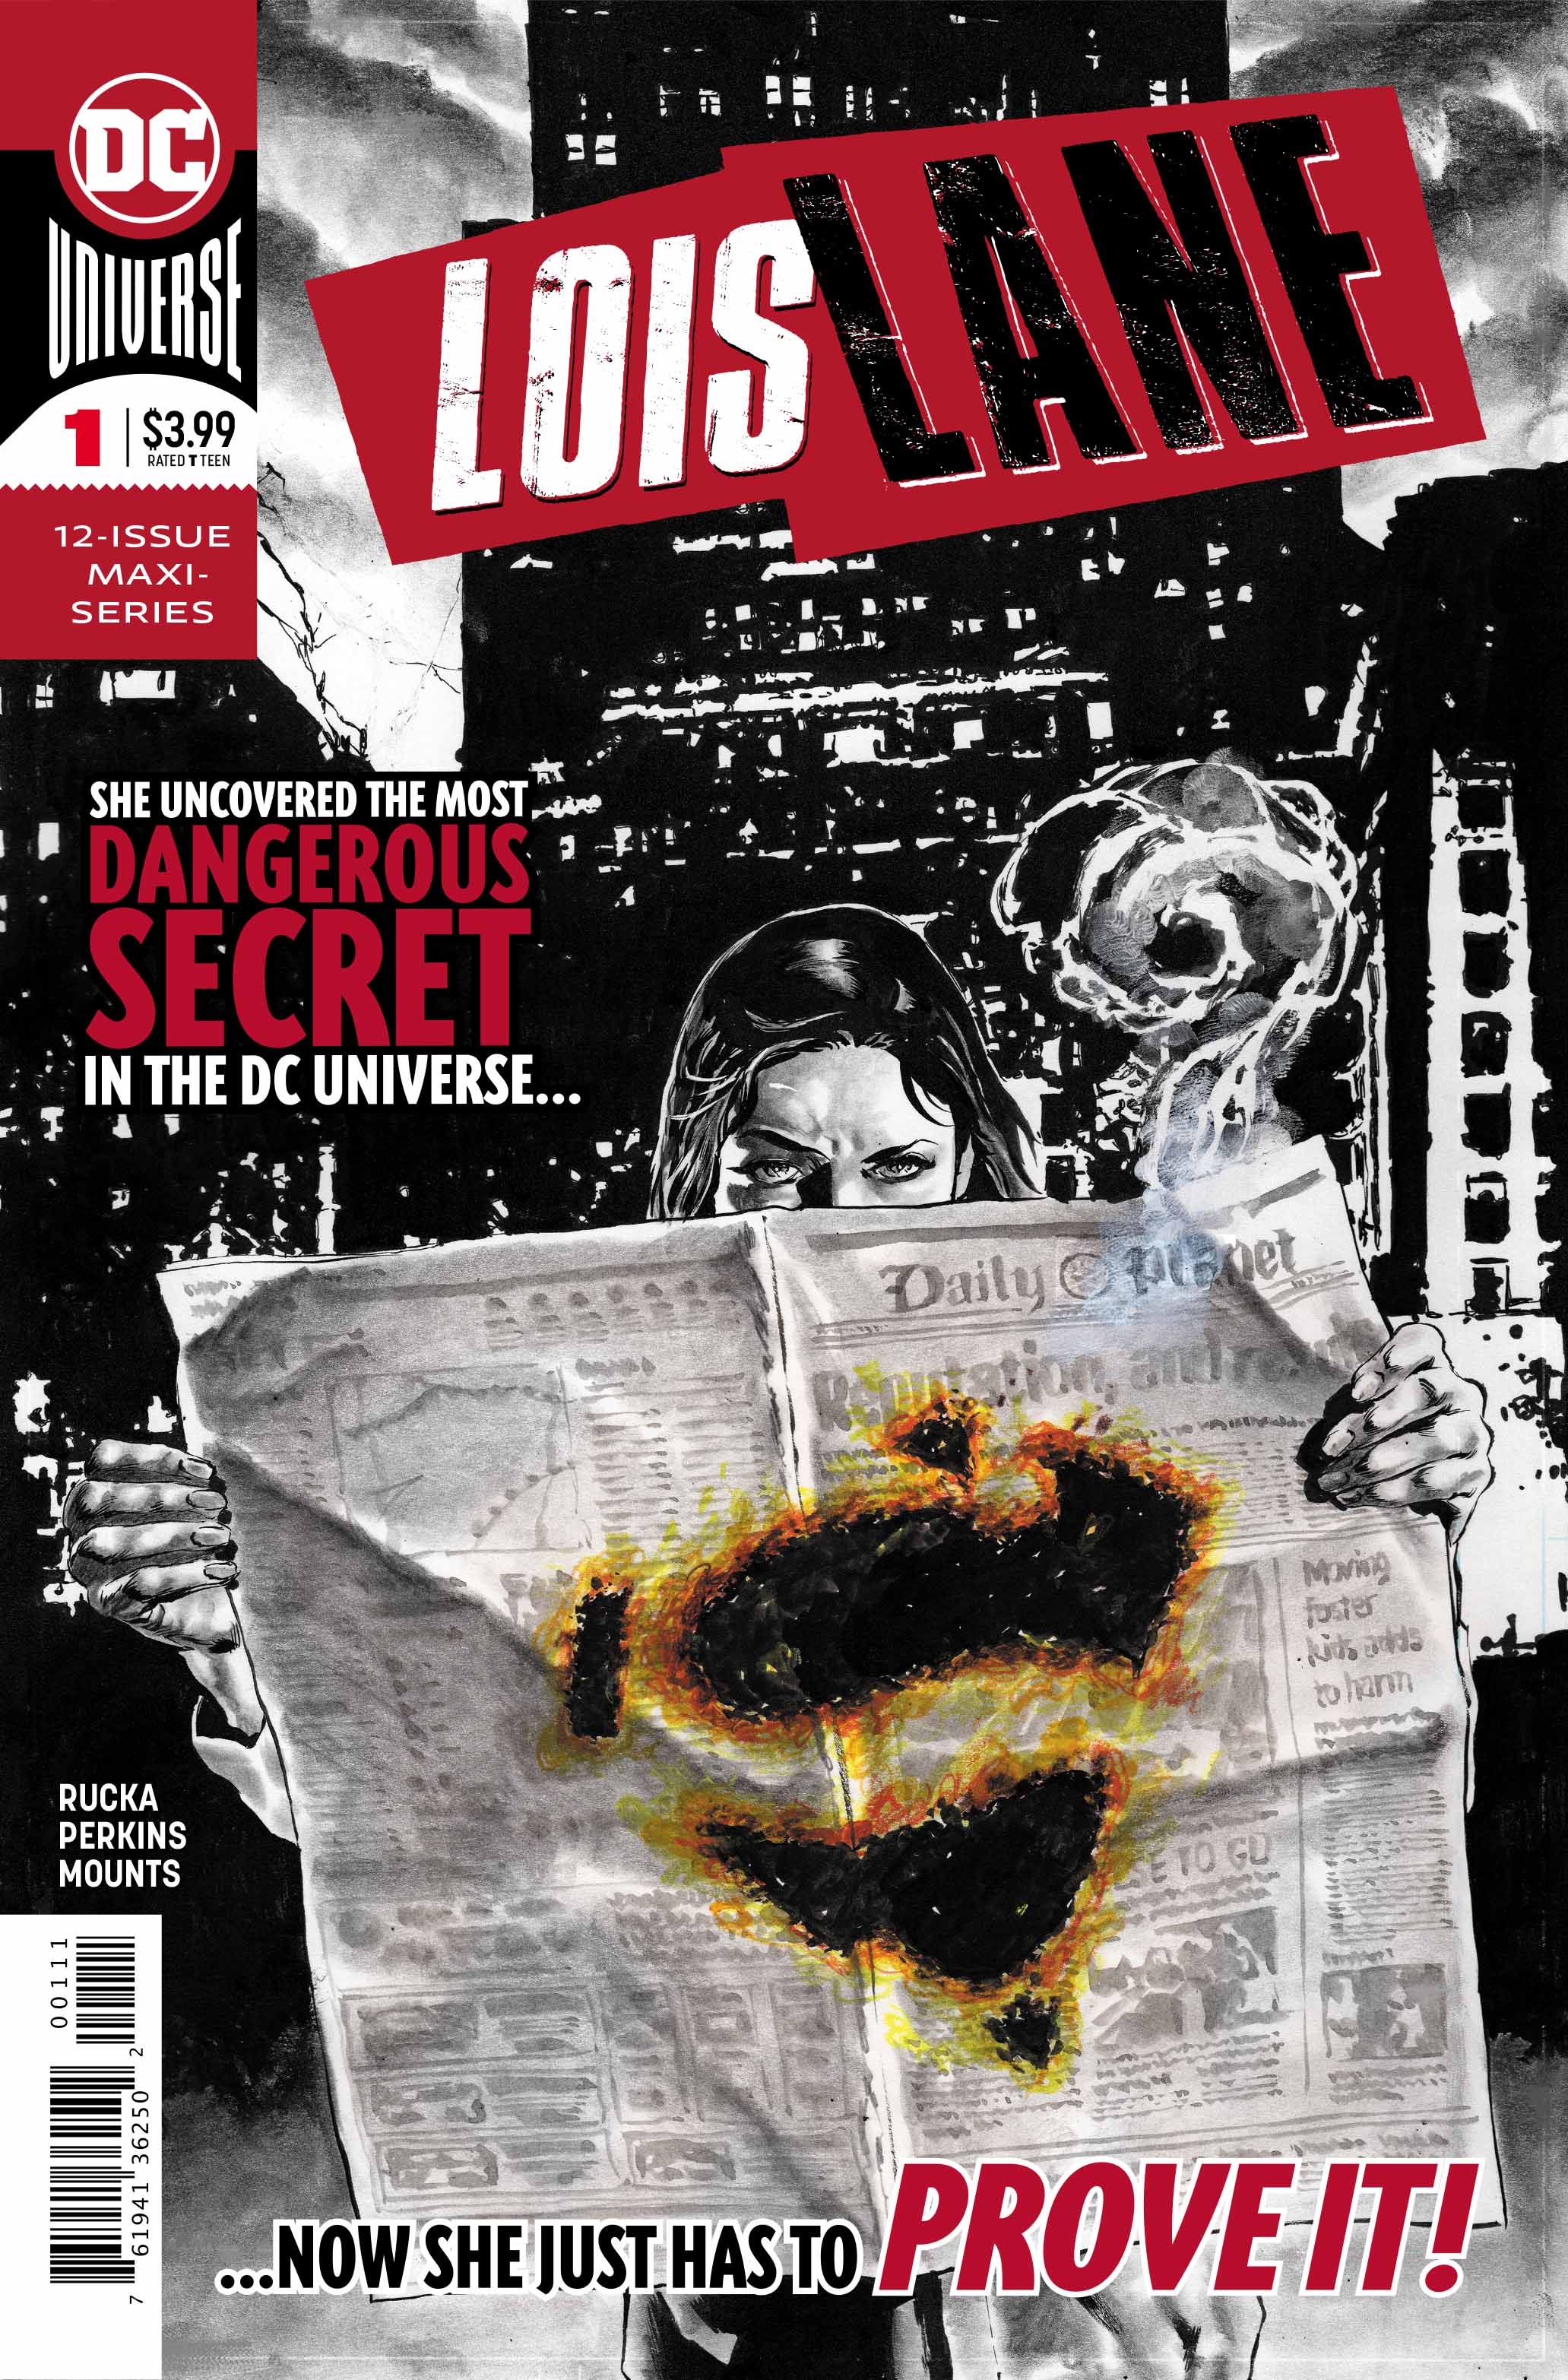 Lois Lane #1 review: the real world